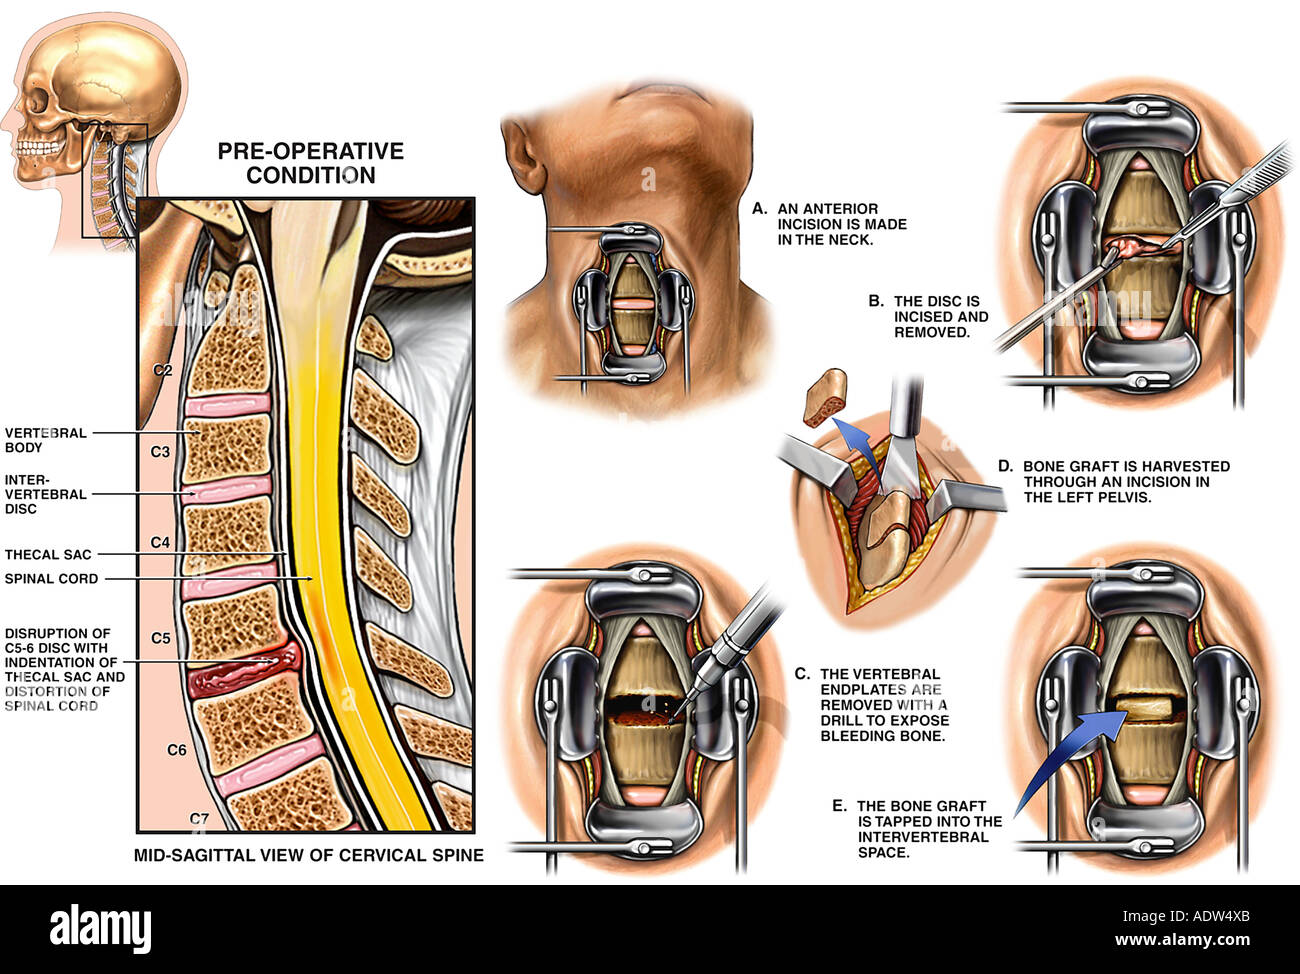 Spinal Fusion Surgery C5 6 Disc Herniation with Anterior Cervical Discectomy (Diskectomy) and Fusion Stock Photo